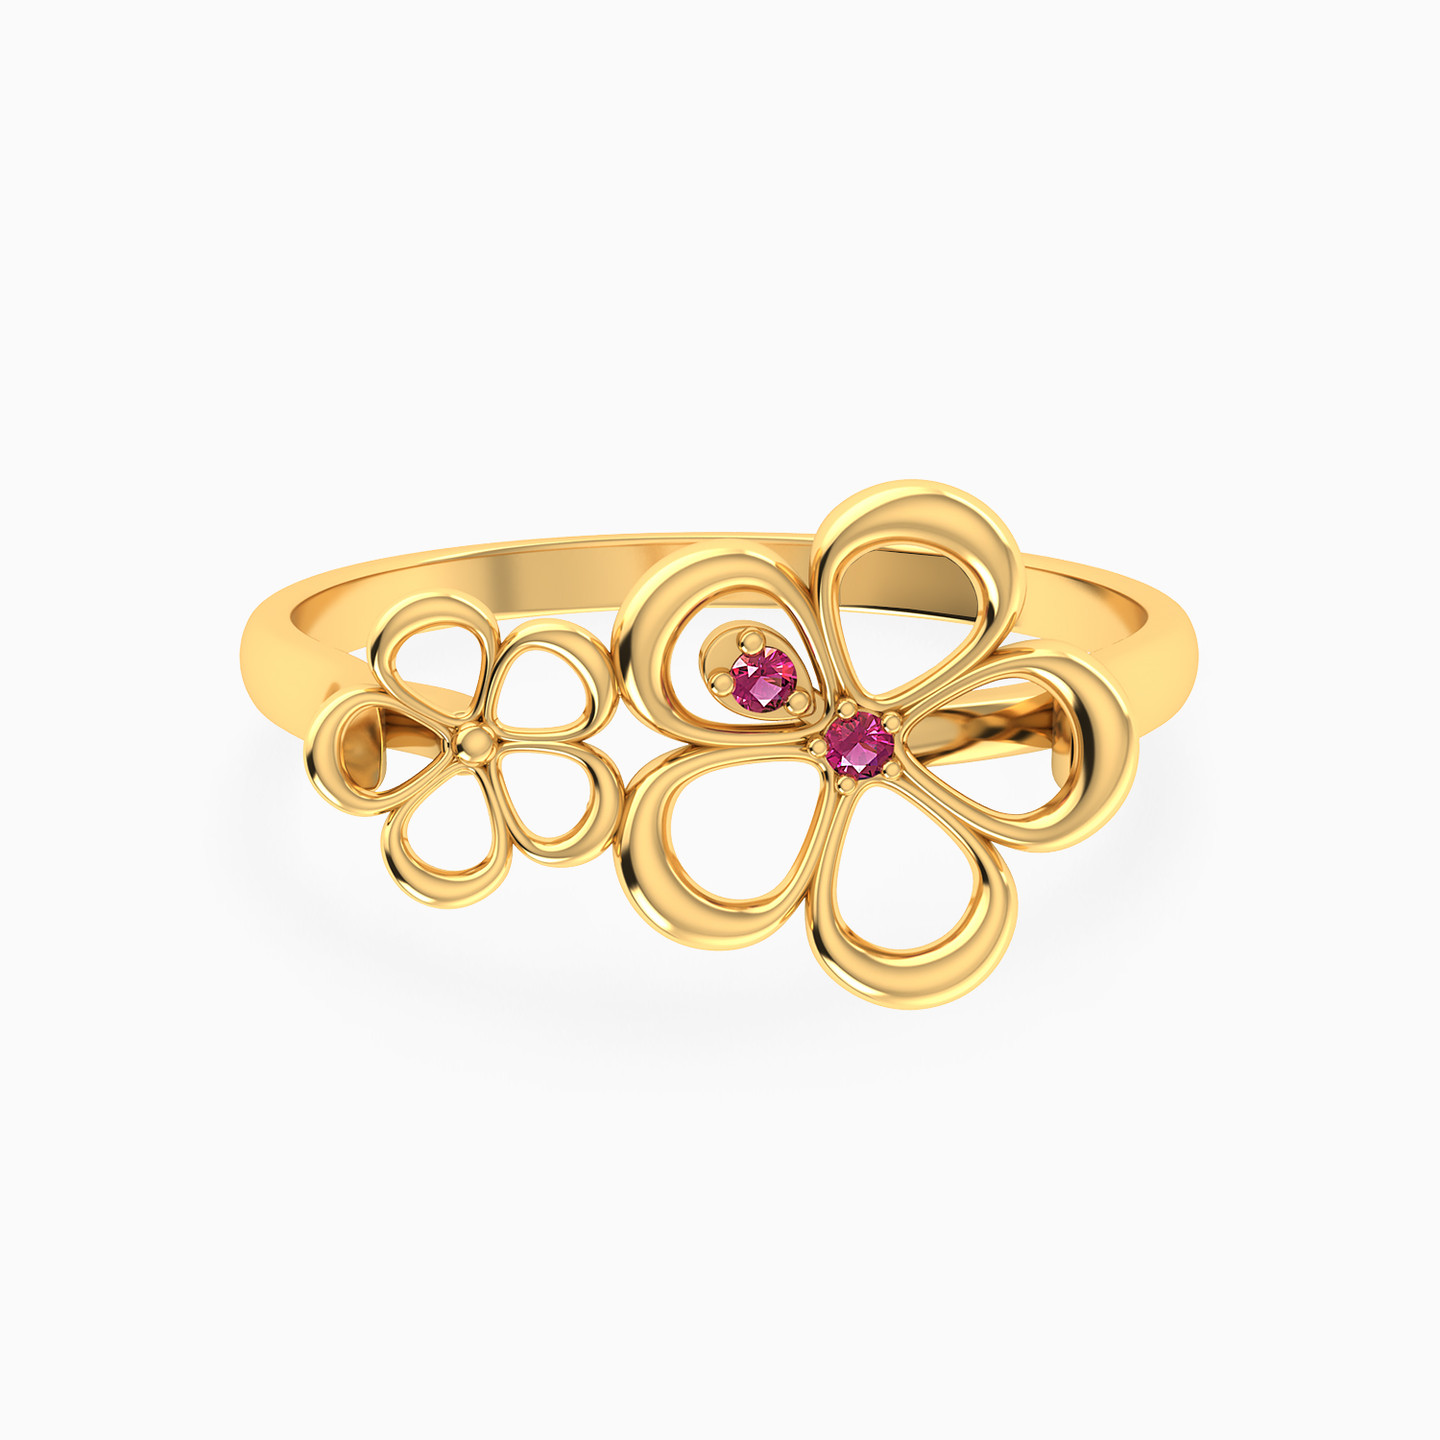 Flower Shaped Colored Stones Statement Ring in 18K Gold